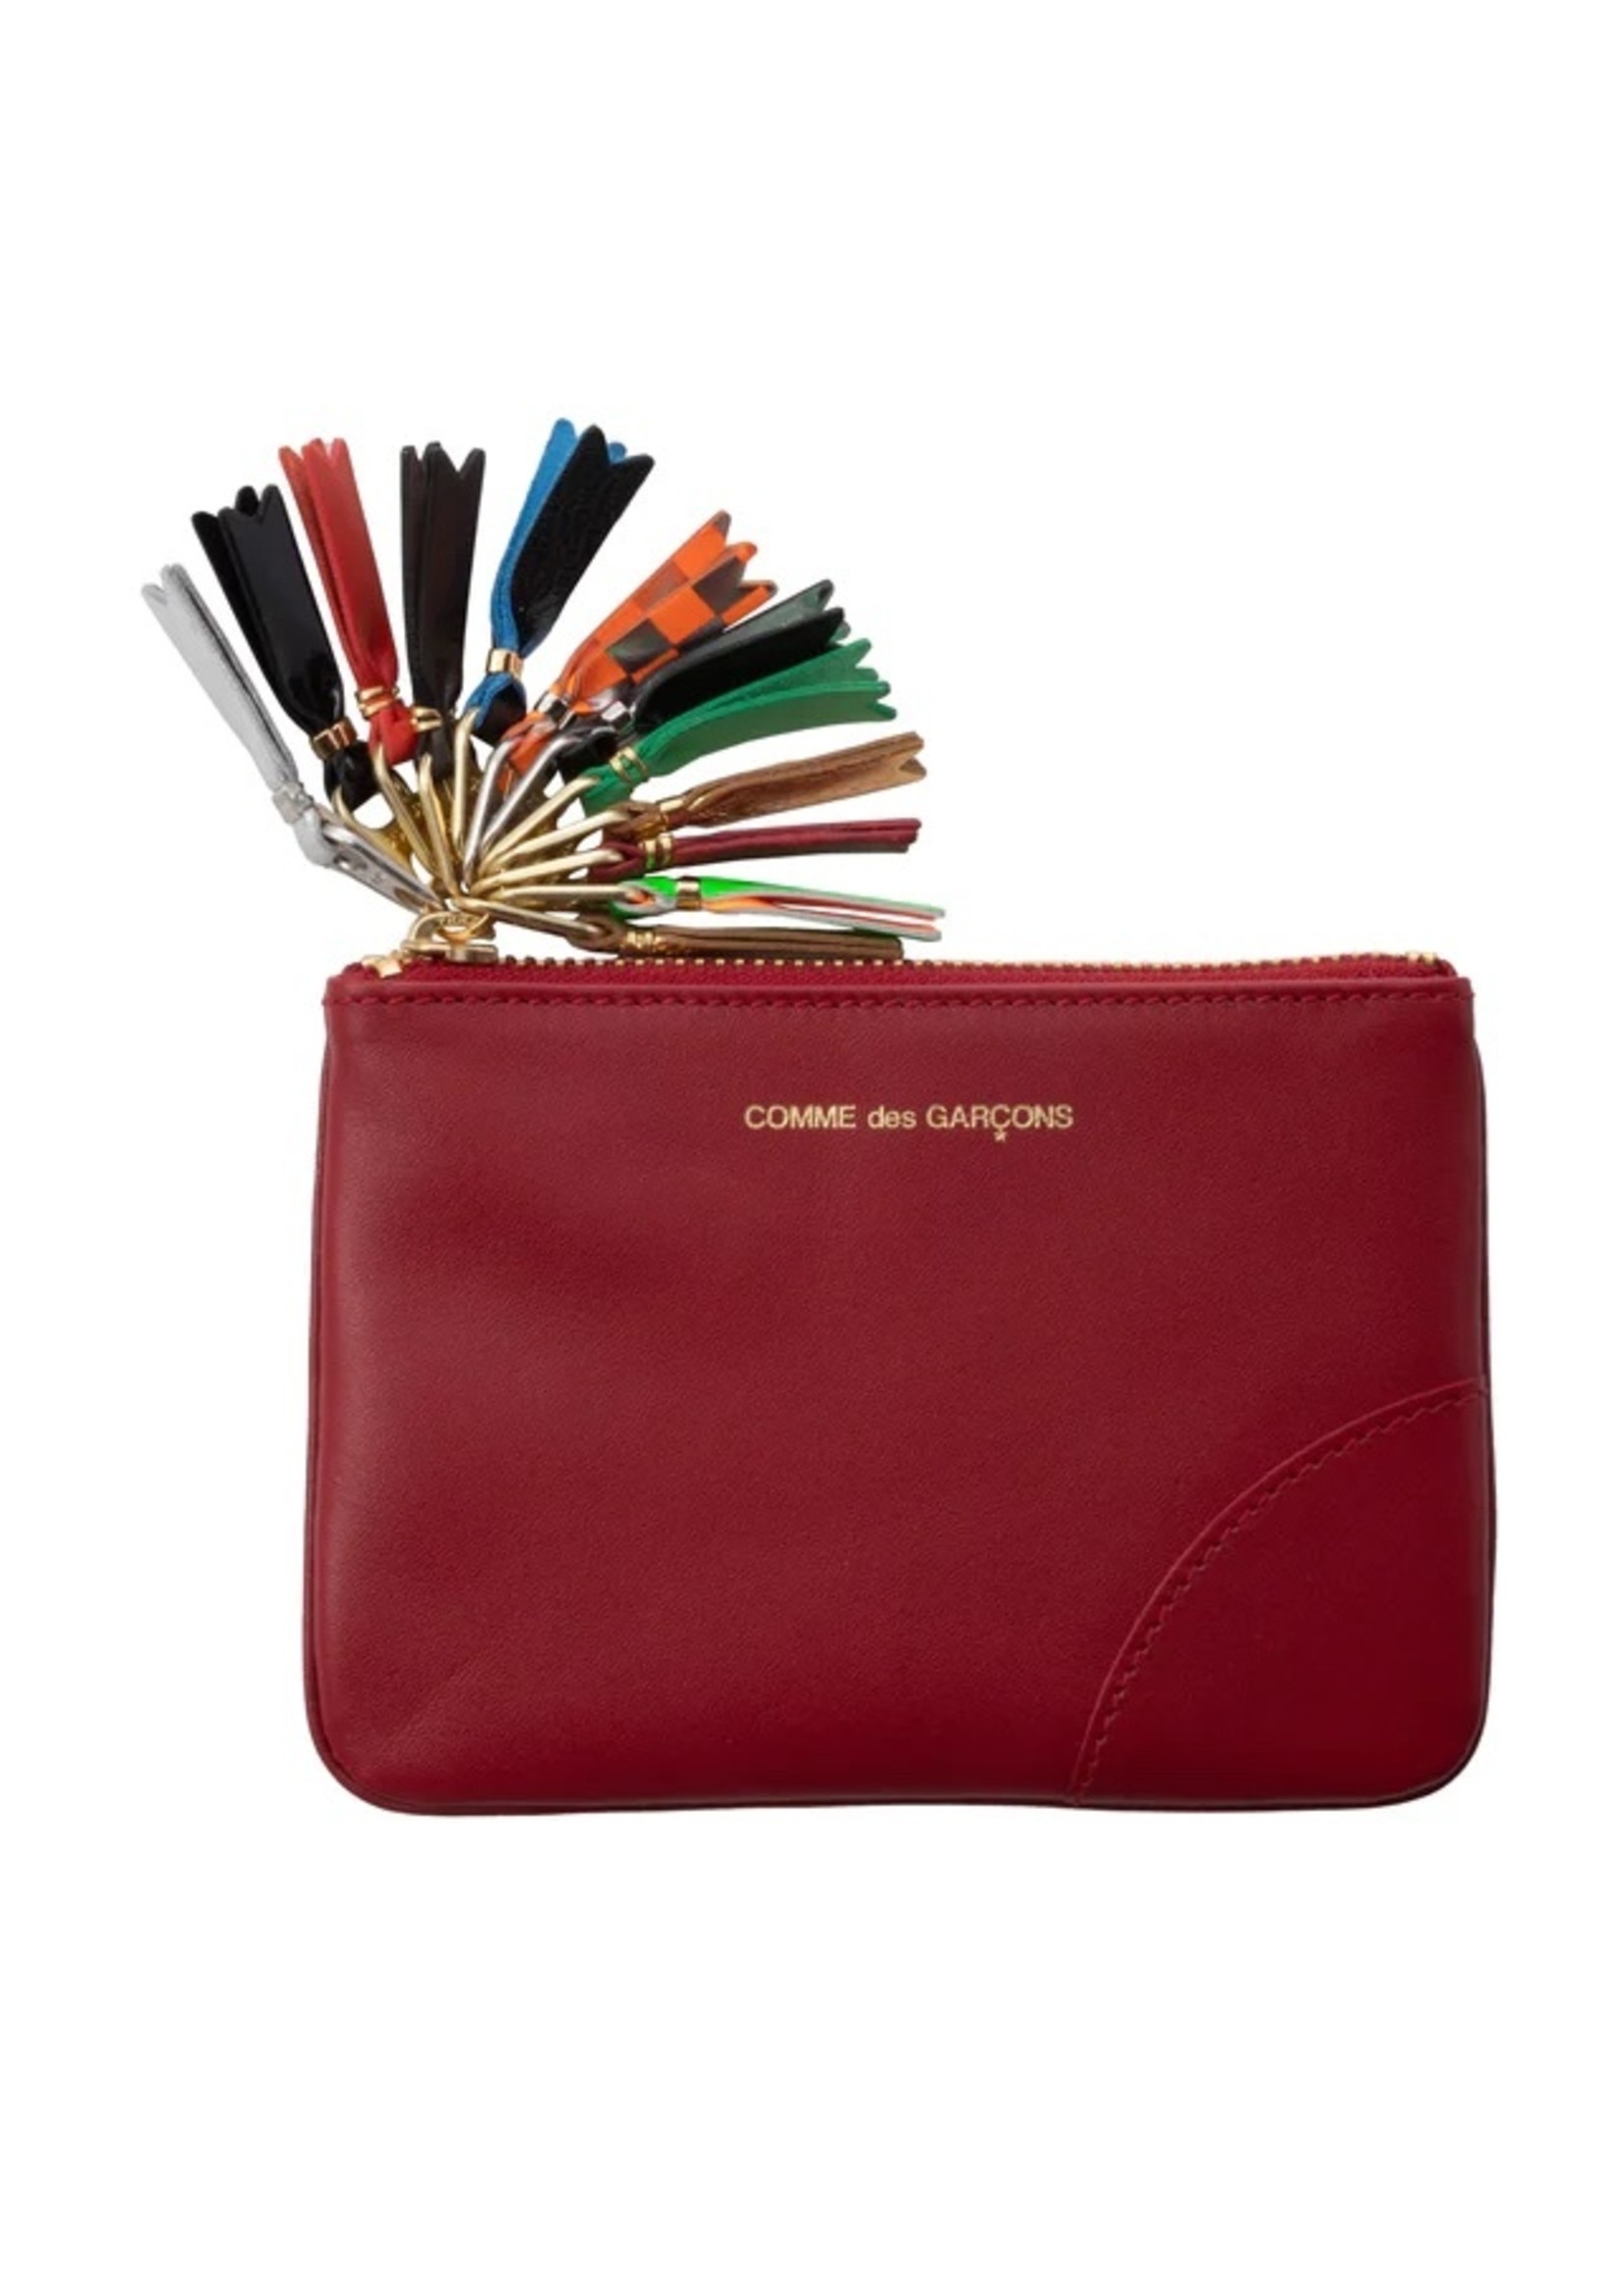 COMME des GARÇONS WALLET Limited Edition Small Multi Zipper Pull Pouch in Red